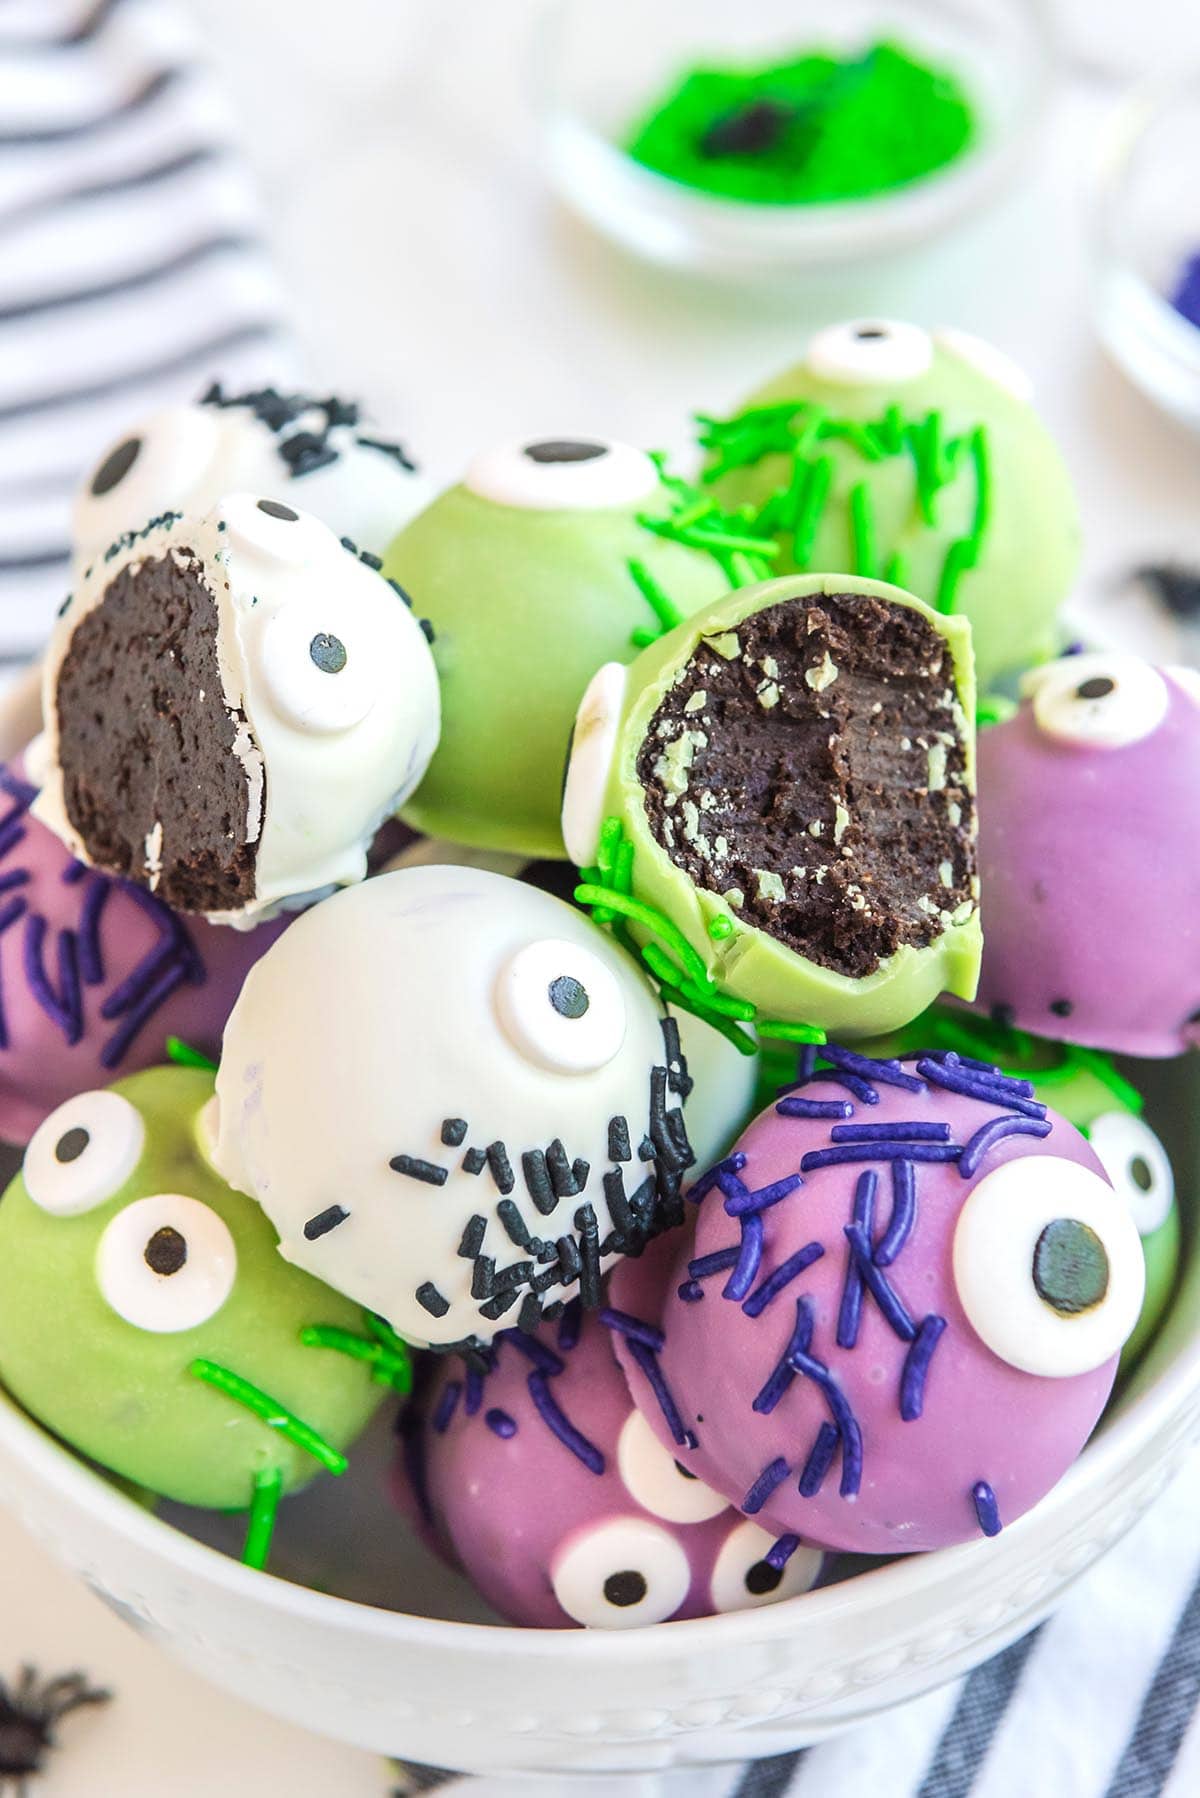 bitten oreo balls with green candy coating in a bowl together with a couple more monster eye balls.